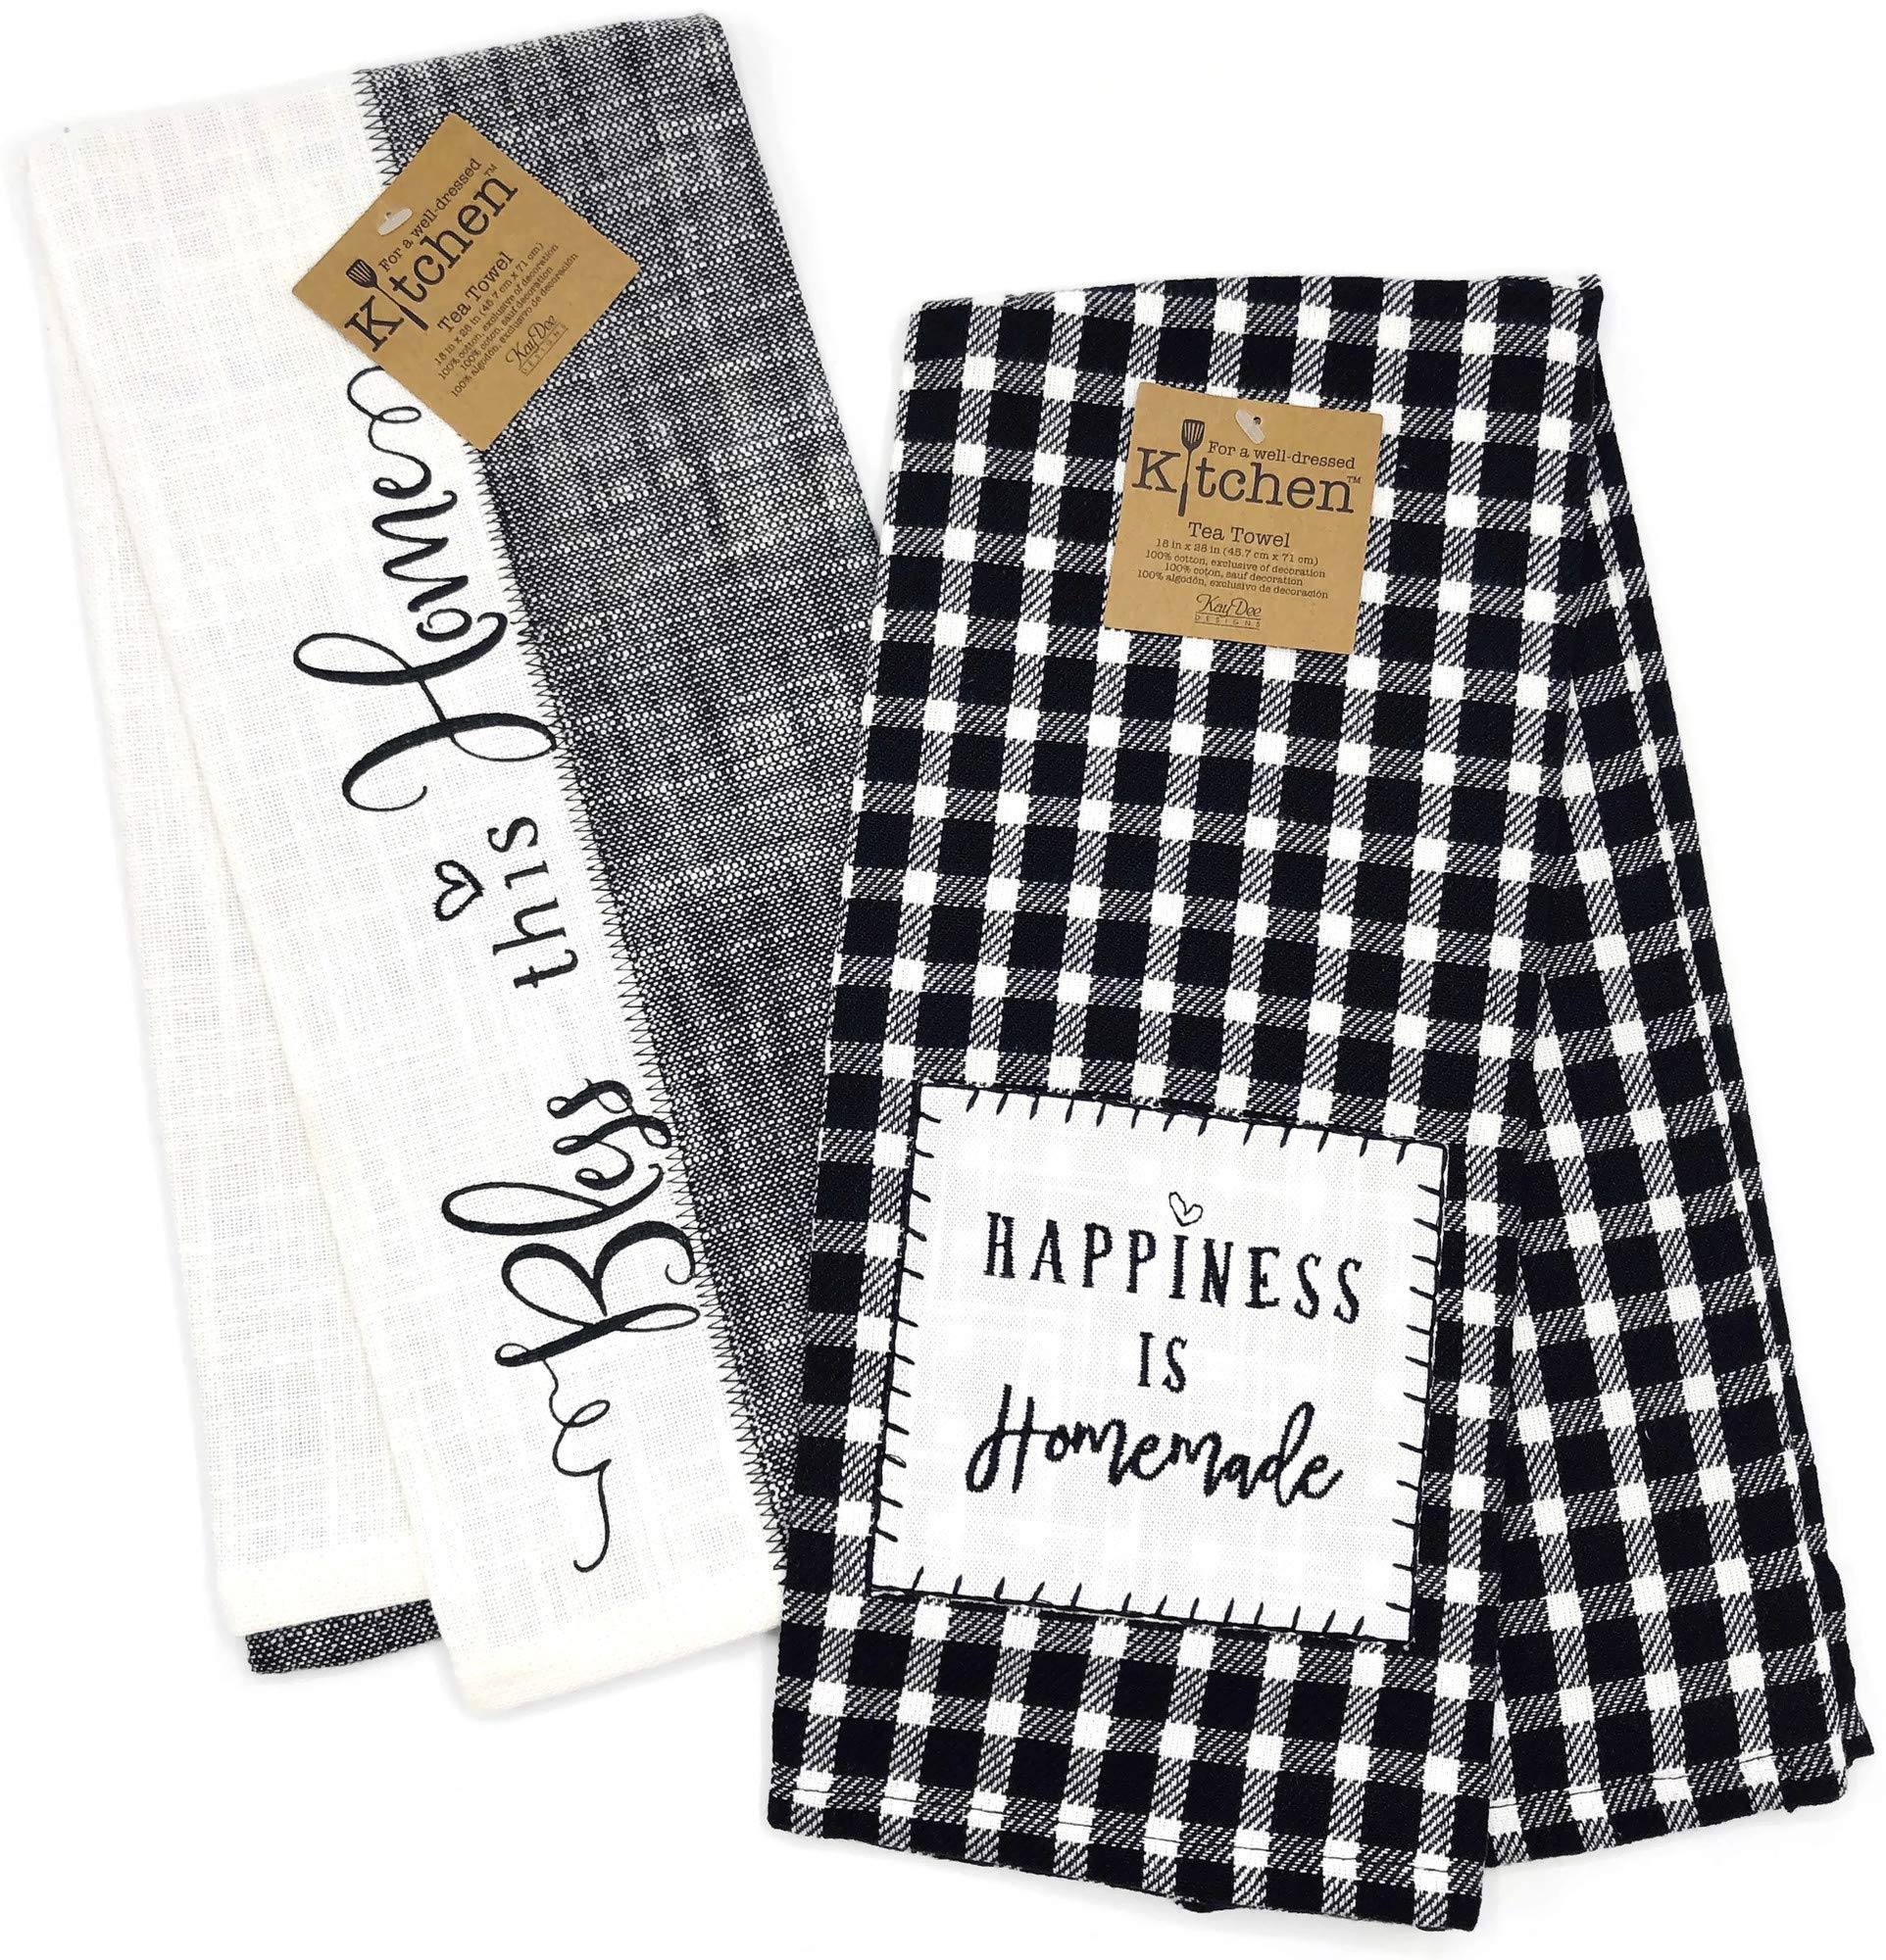 Kay Dee Designs Farmhouse, Happiness is Homemade & Bless This Home Tea Towel Kitchen Dishtowel Set, Classic Flat Tea Towel Ideal for Drying Glassware and Everyday Kitchen Tasks